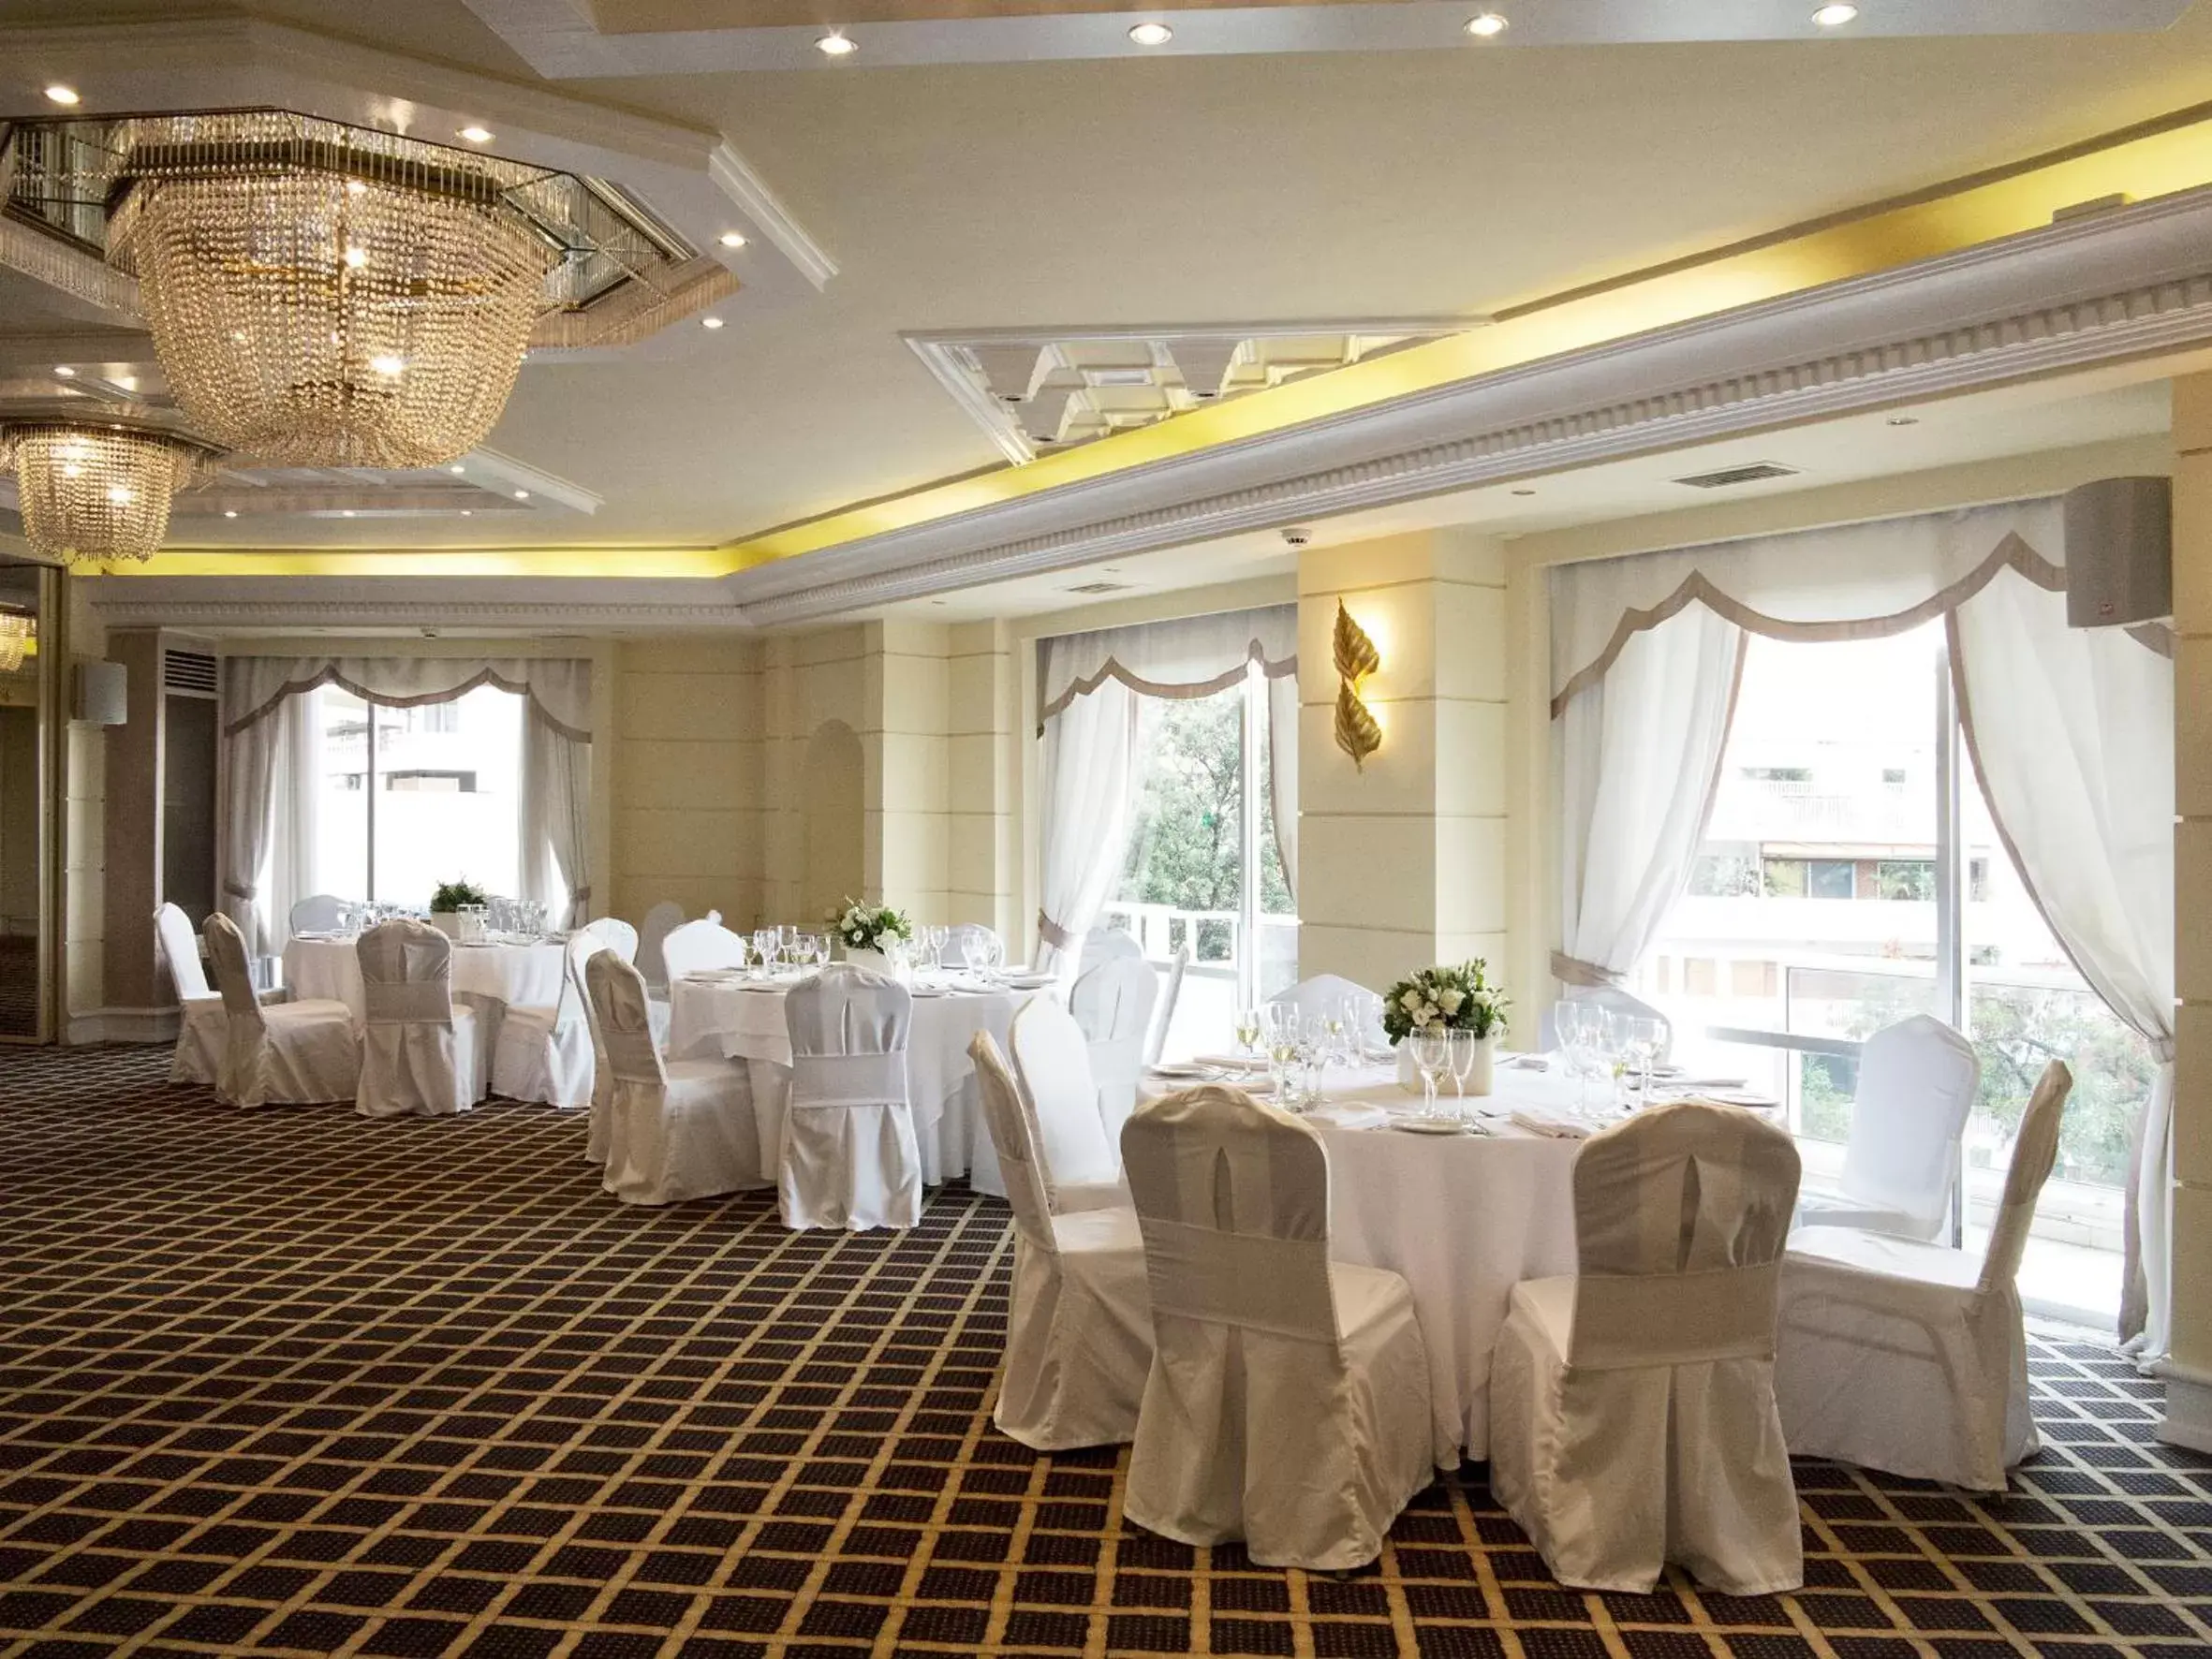 Banquet/Function facilities, Banquet Facilities in St George Lycabettus Lifestyle Hotel